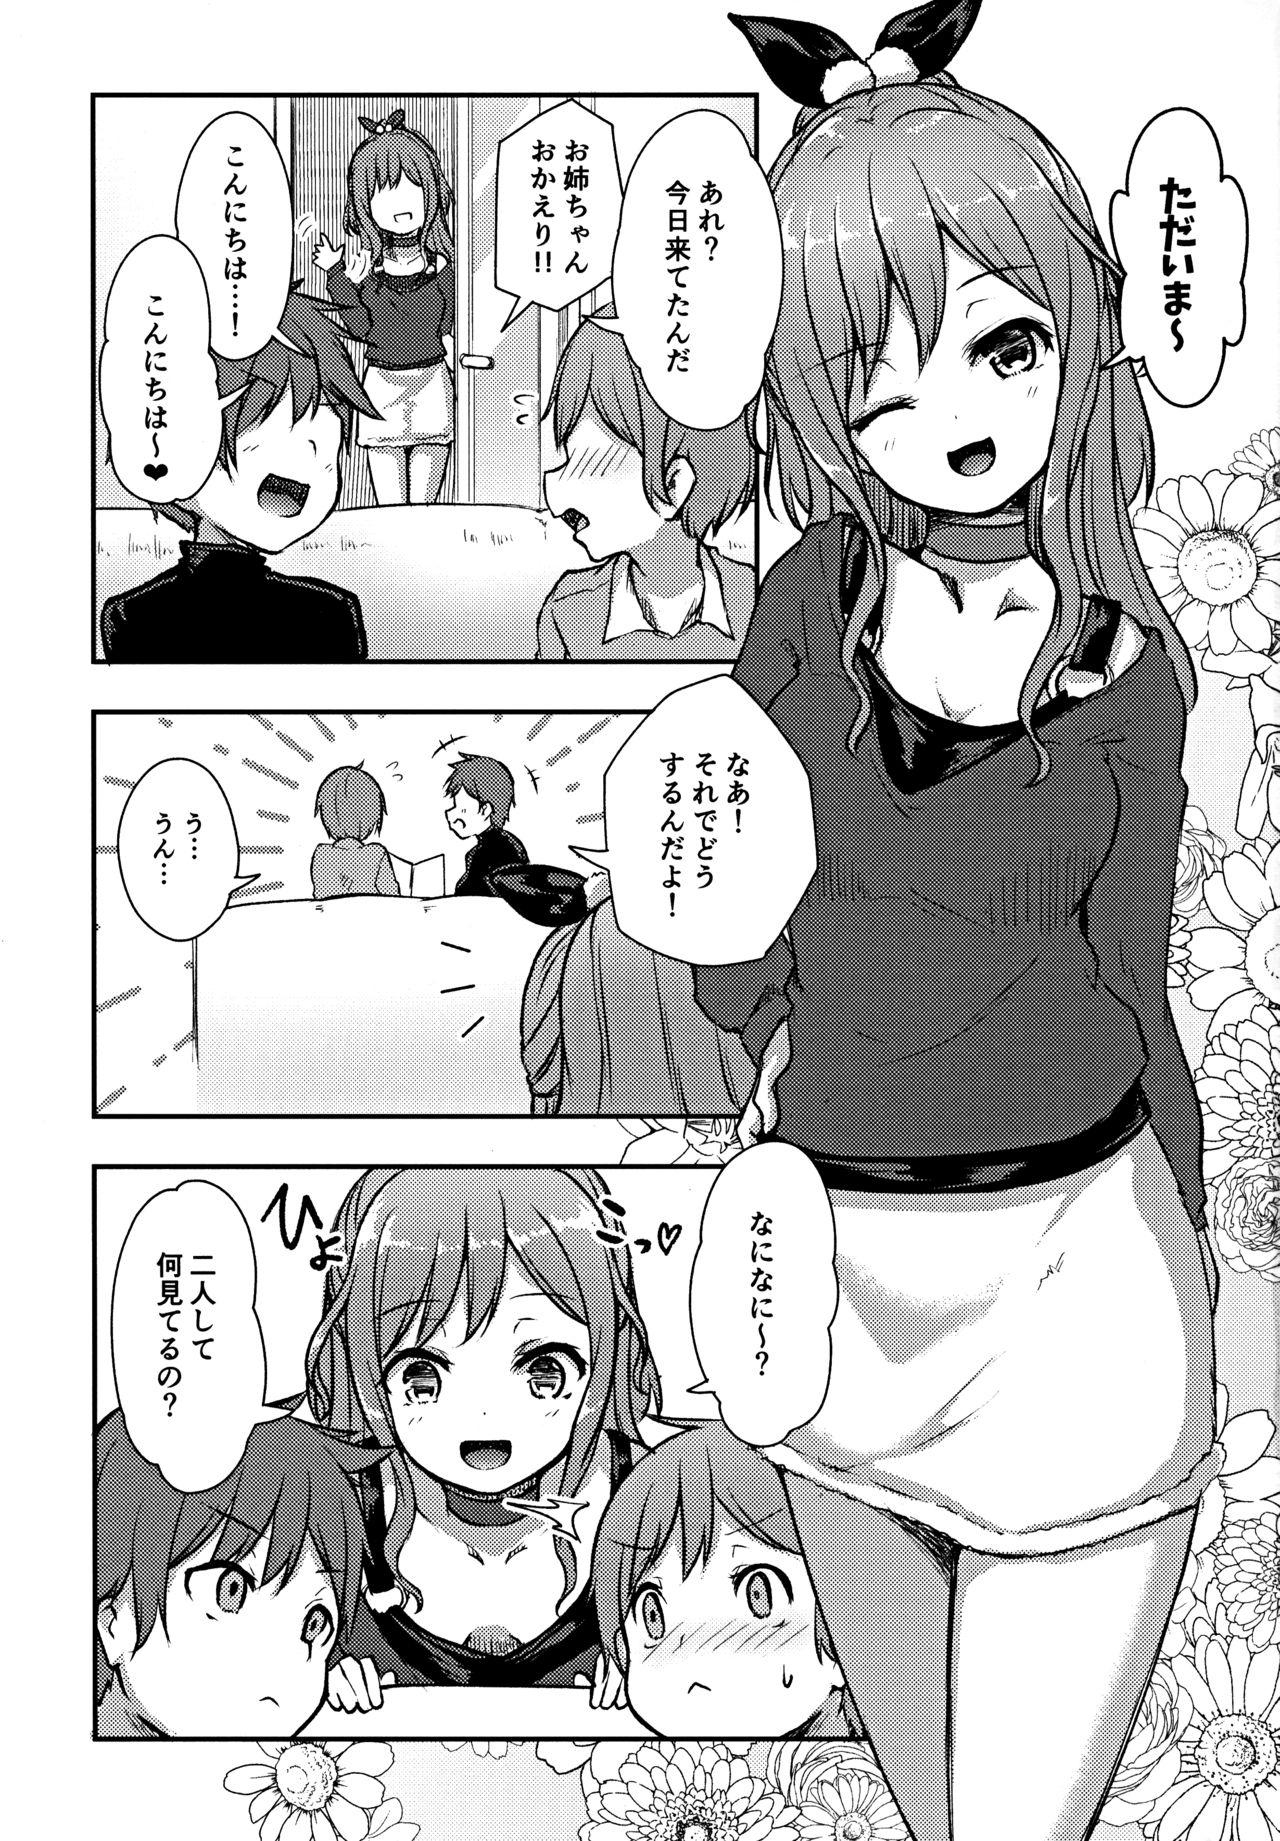 Grandpa Hearty Hybrid Household - Bang dream Sixtynine - Page 2